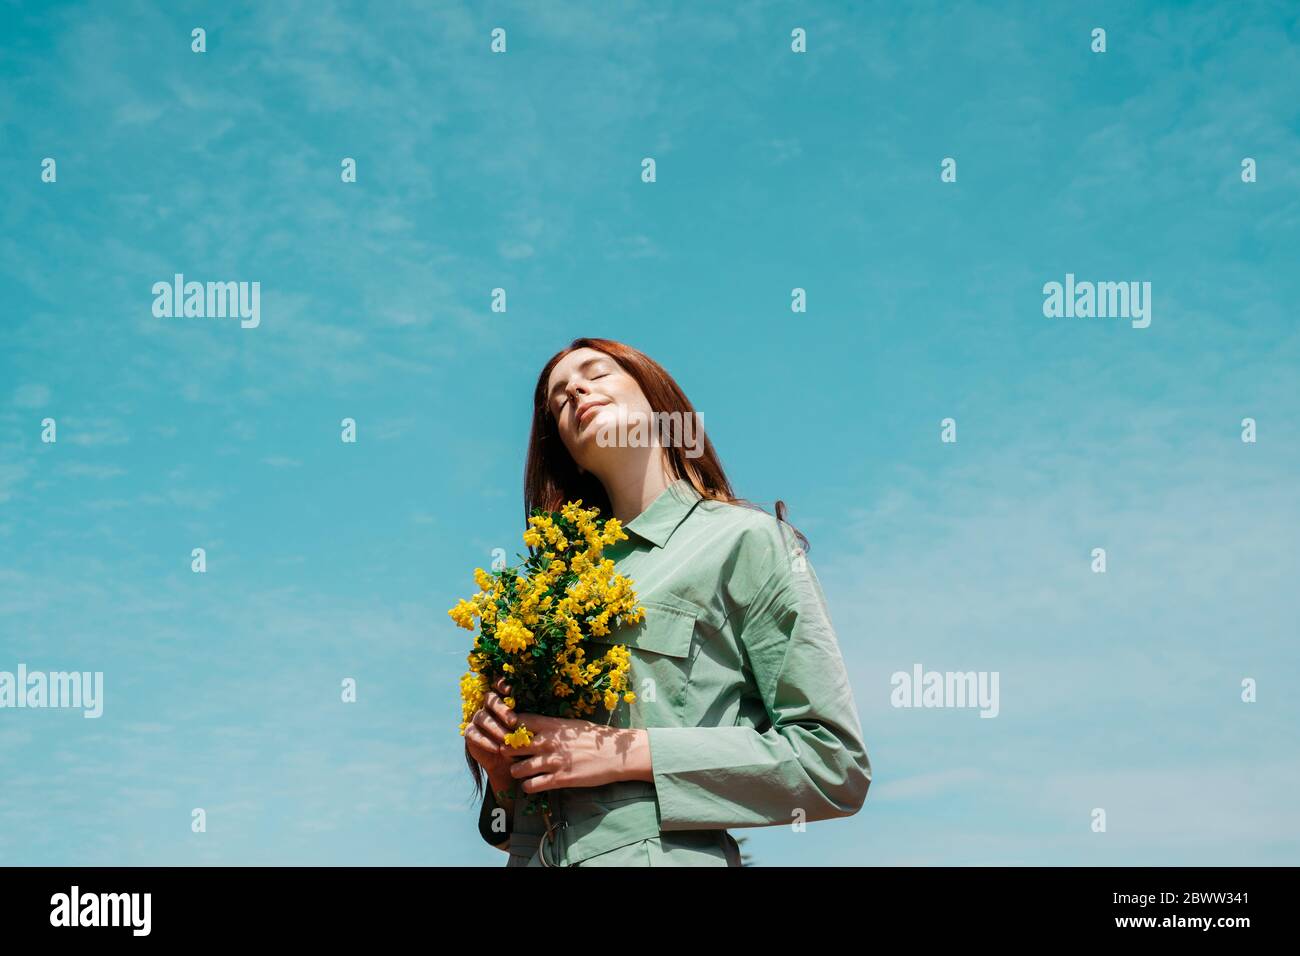 Portrait of redheaded young woman with eyes closed standing against sky holding bunch of yellows flowers Stock Photo